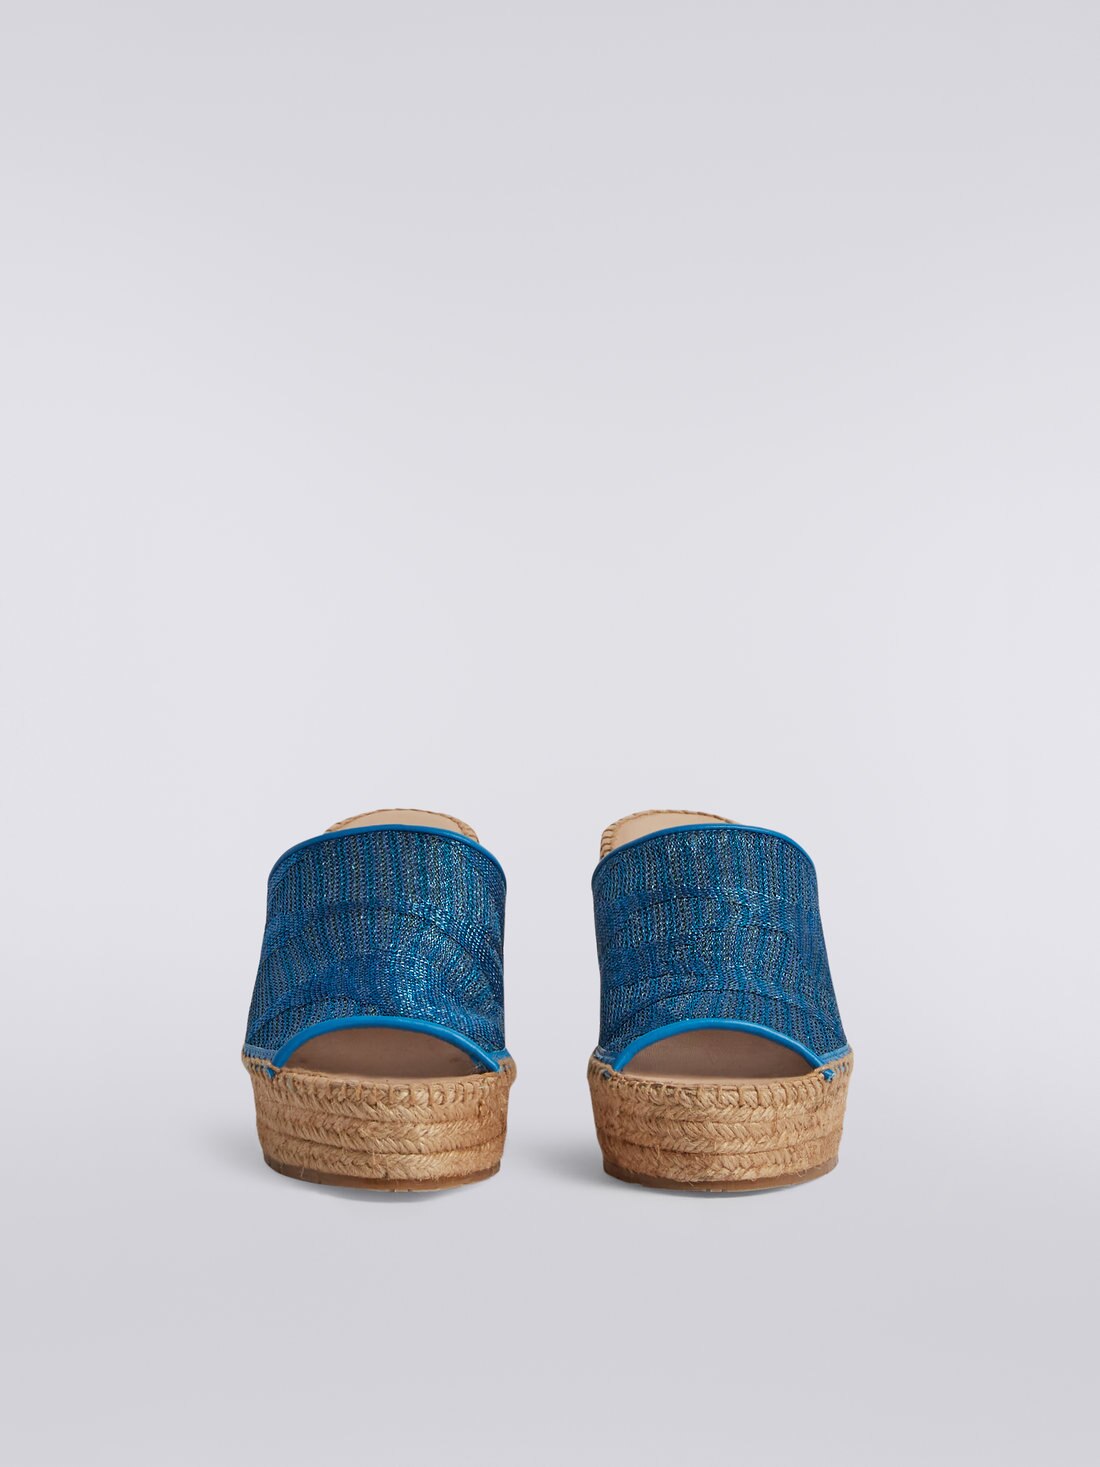 Espadrilles with wedge and chevron knit band, Blue - AS23WY09BT006OS72CY - 2